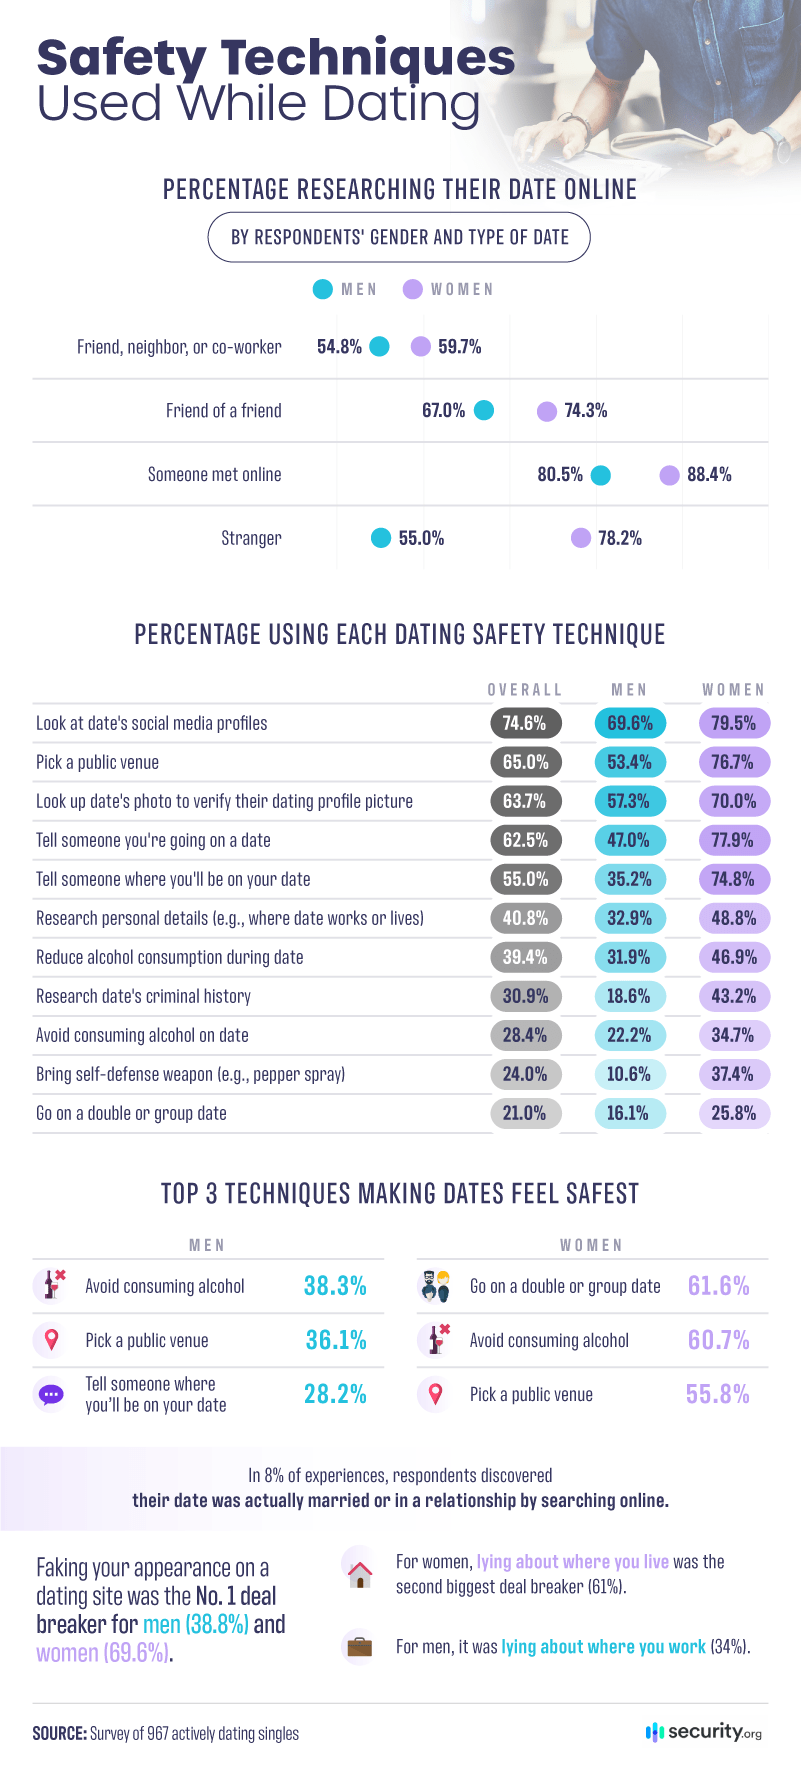 Safety Techniques Used While Dating